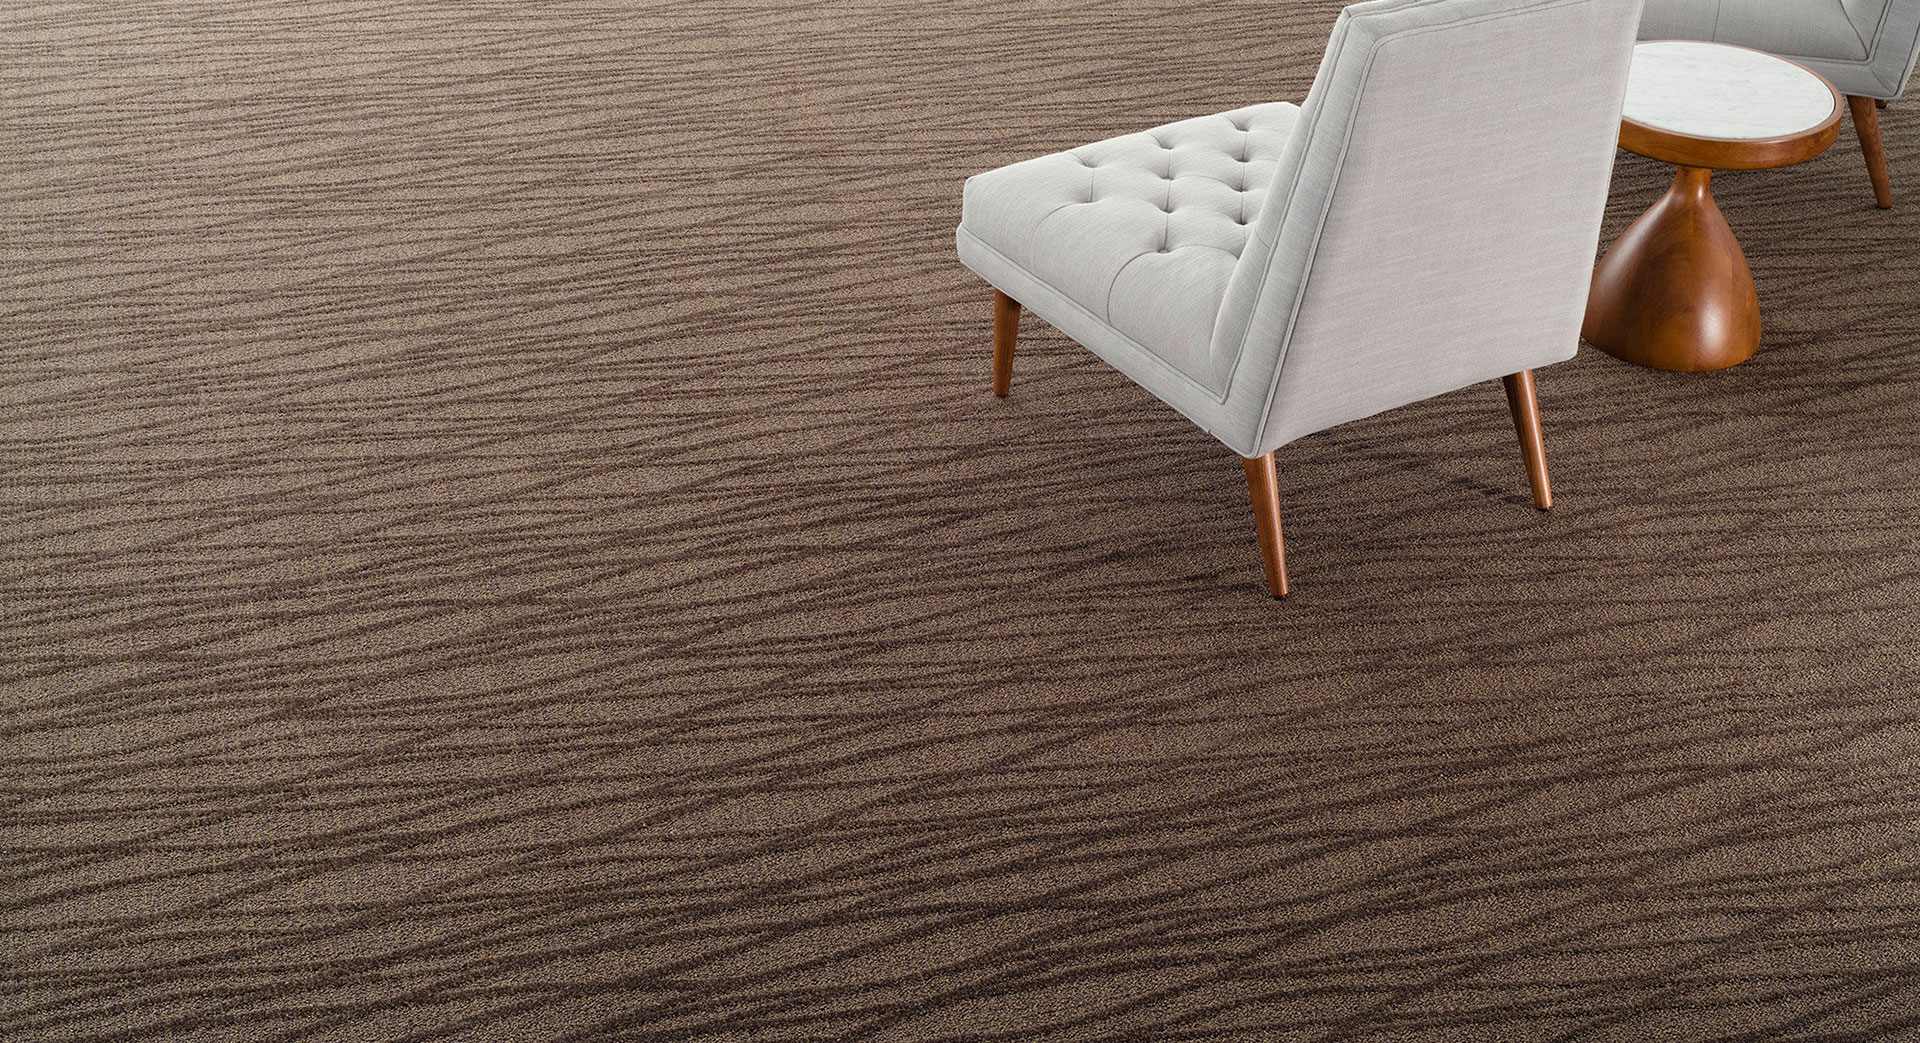 Carpet can improve your commercial place